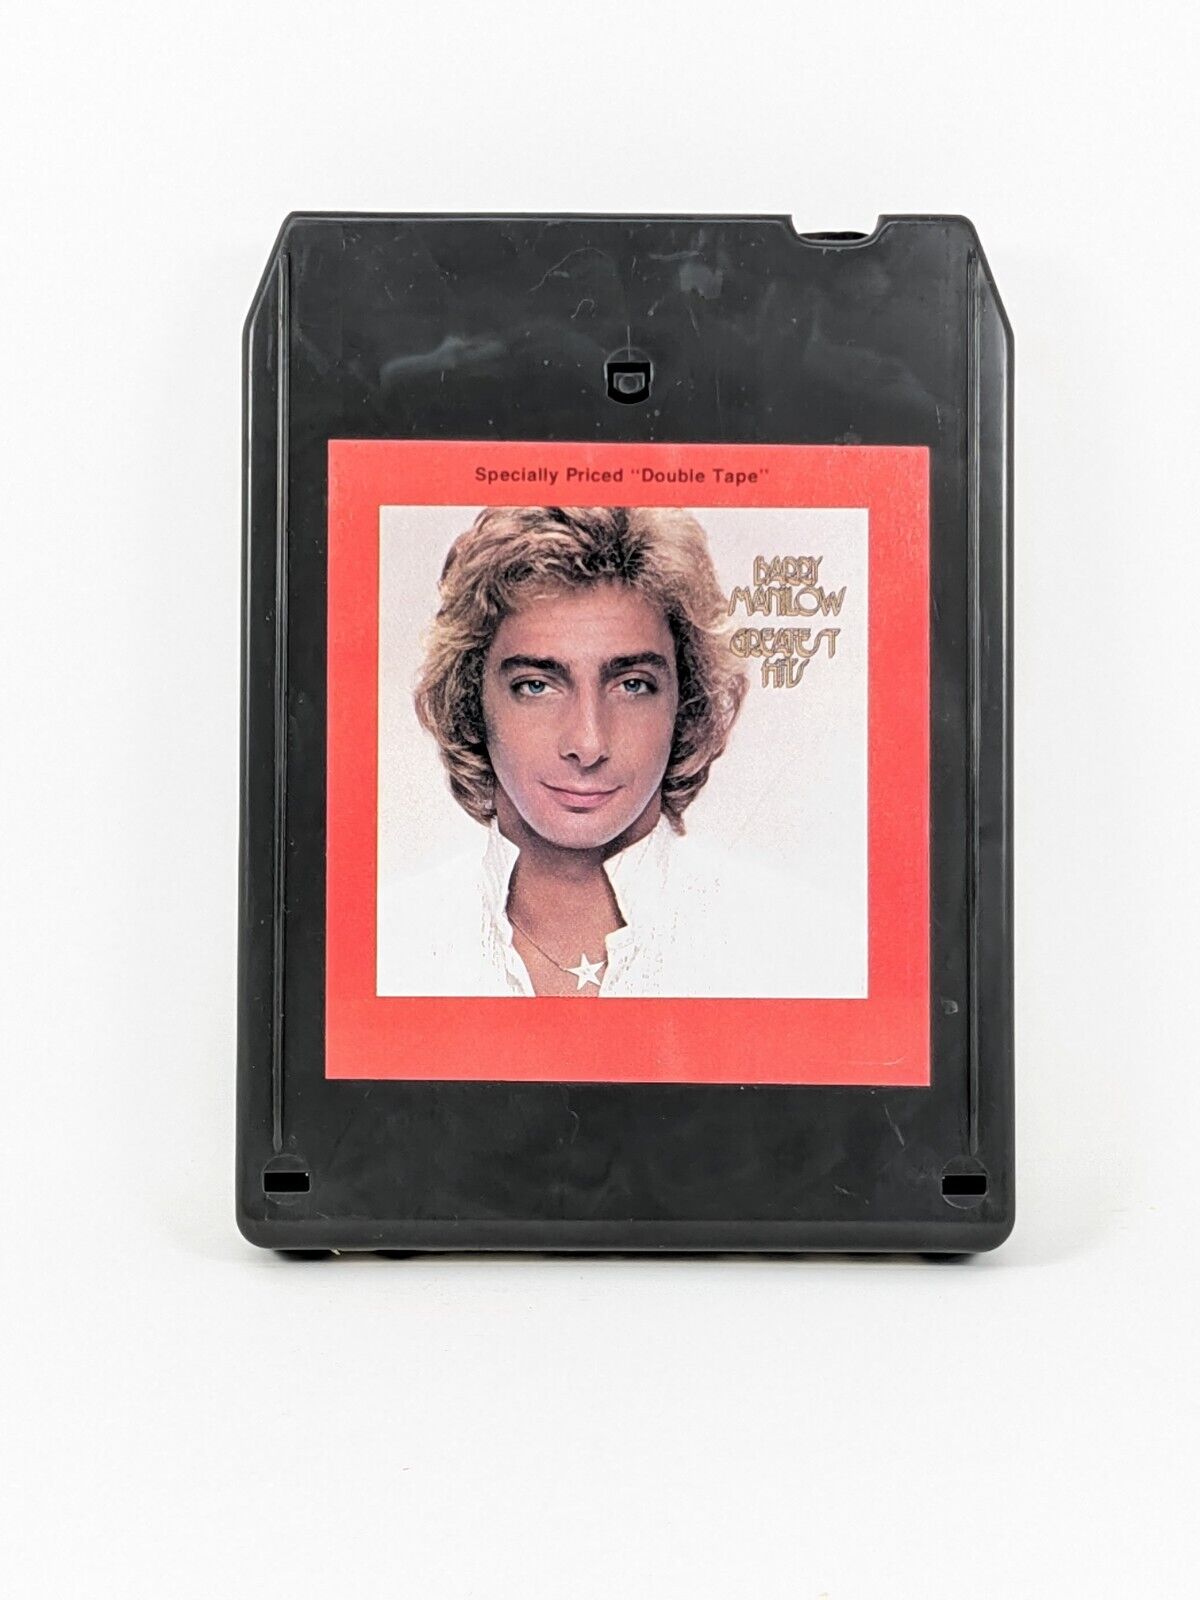 Barry Manilow Greatest Hits 8 track tape